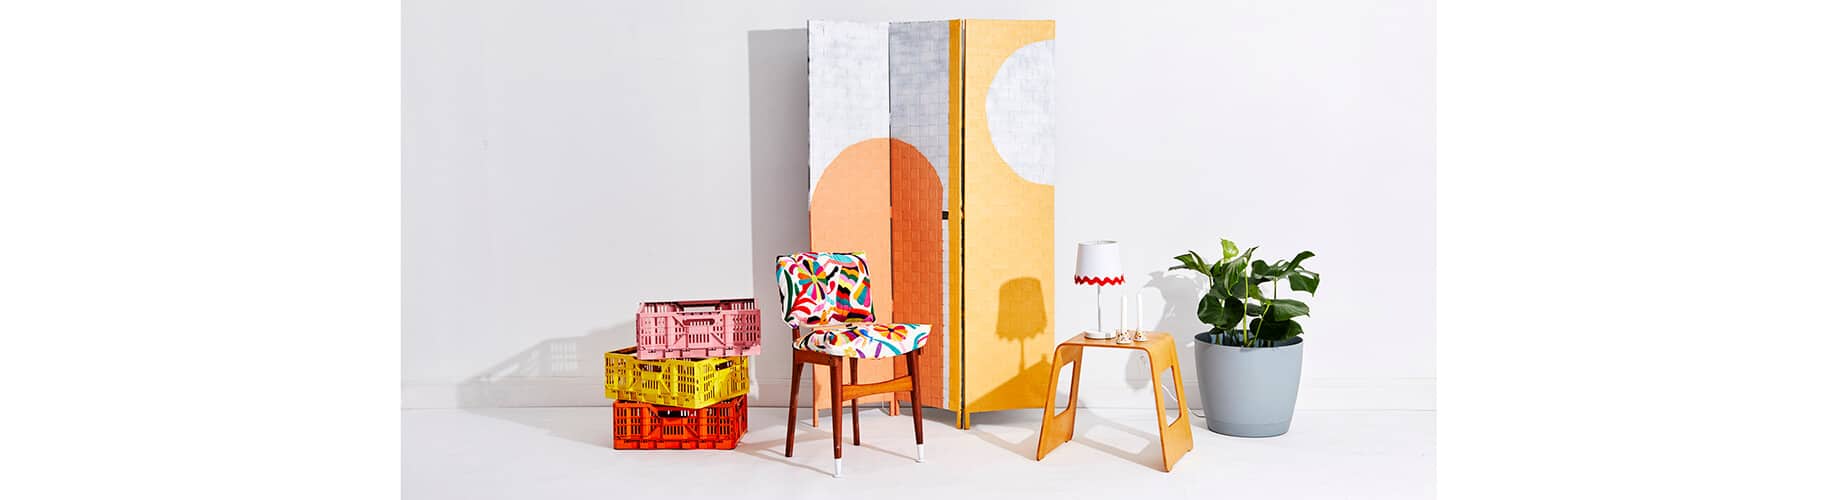 a colourful still life photography of crates, chair, lamp, and room divider